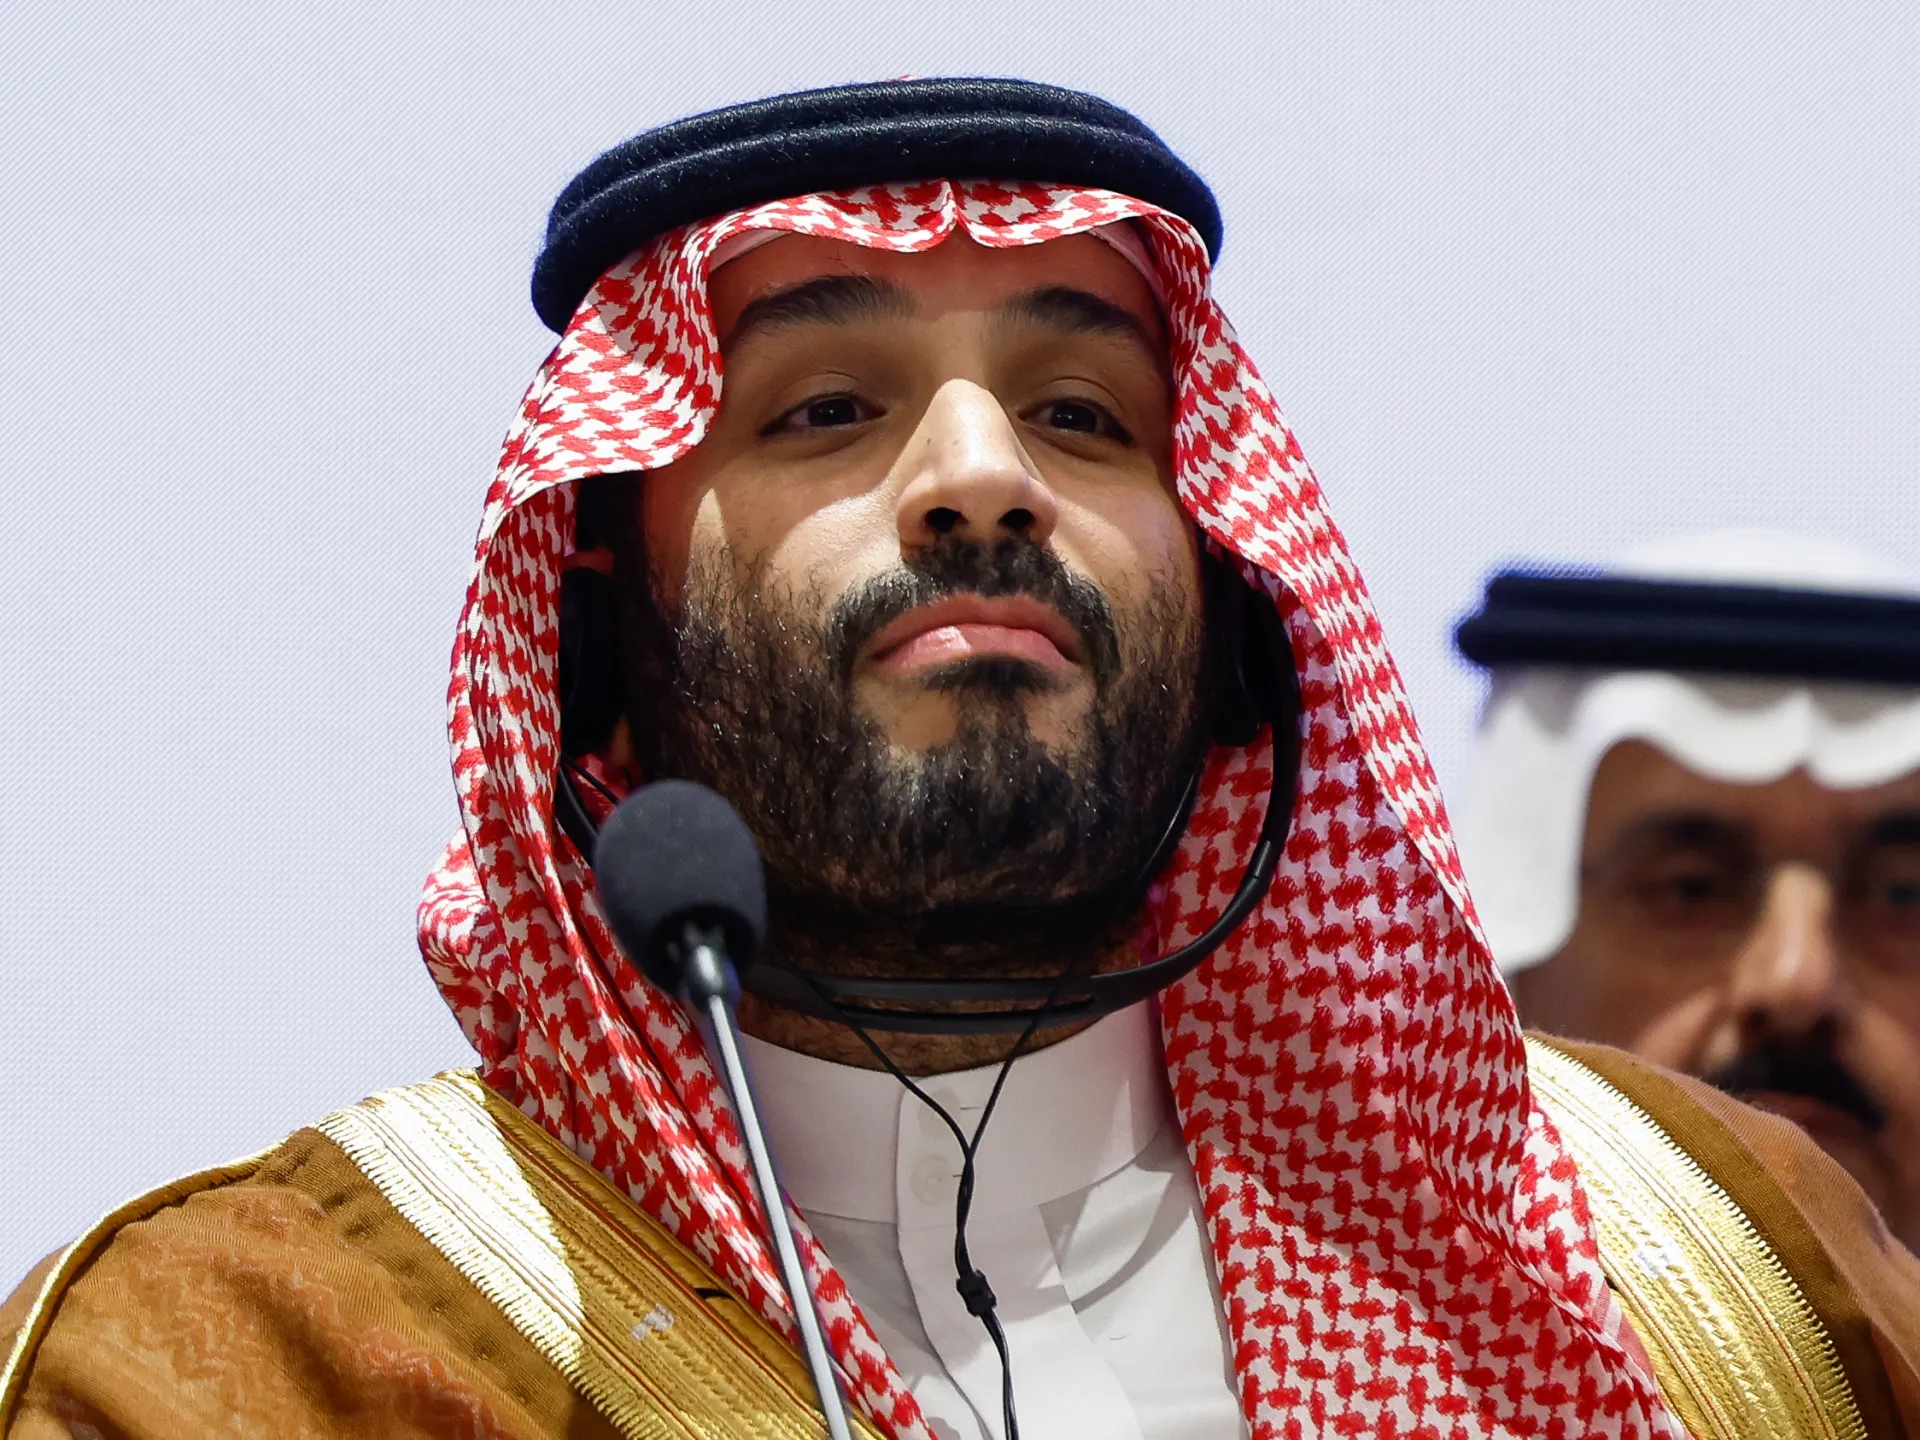 Saudi Arabia to arrest its citizens who comment against Israel on social media